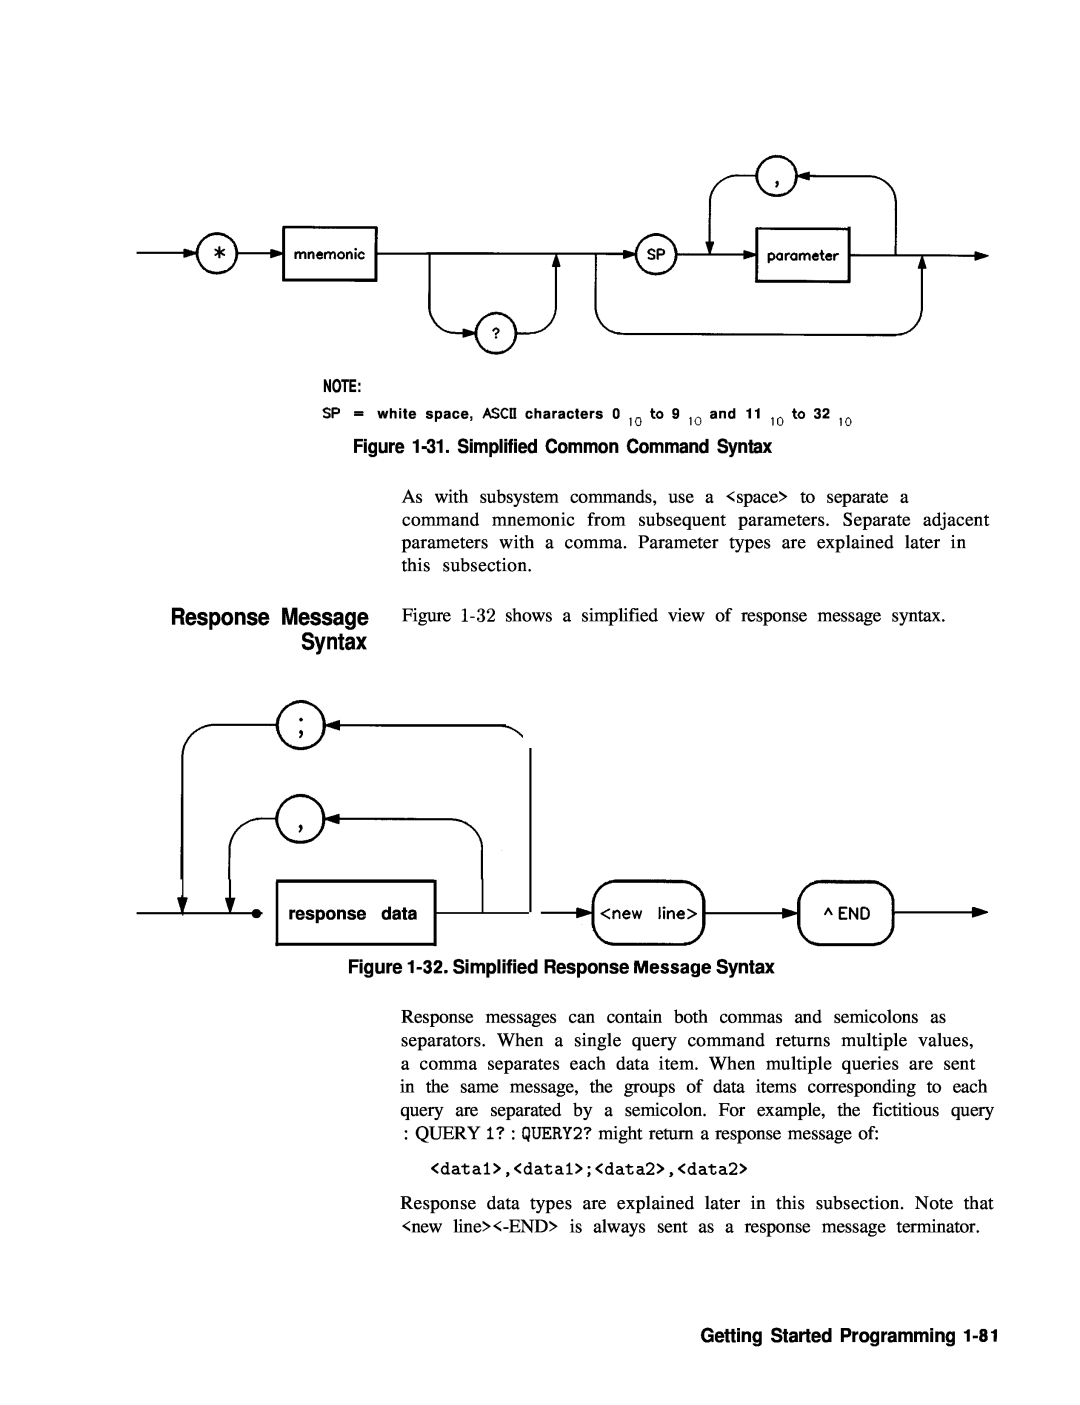 HP 83620A Response Message Syntax, 31. Simplified Common Command Syntax, Figure l-32. Simplified Response MeSSaQe Syntax 